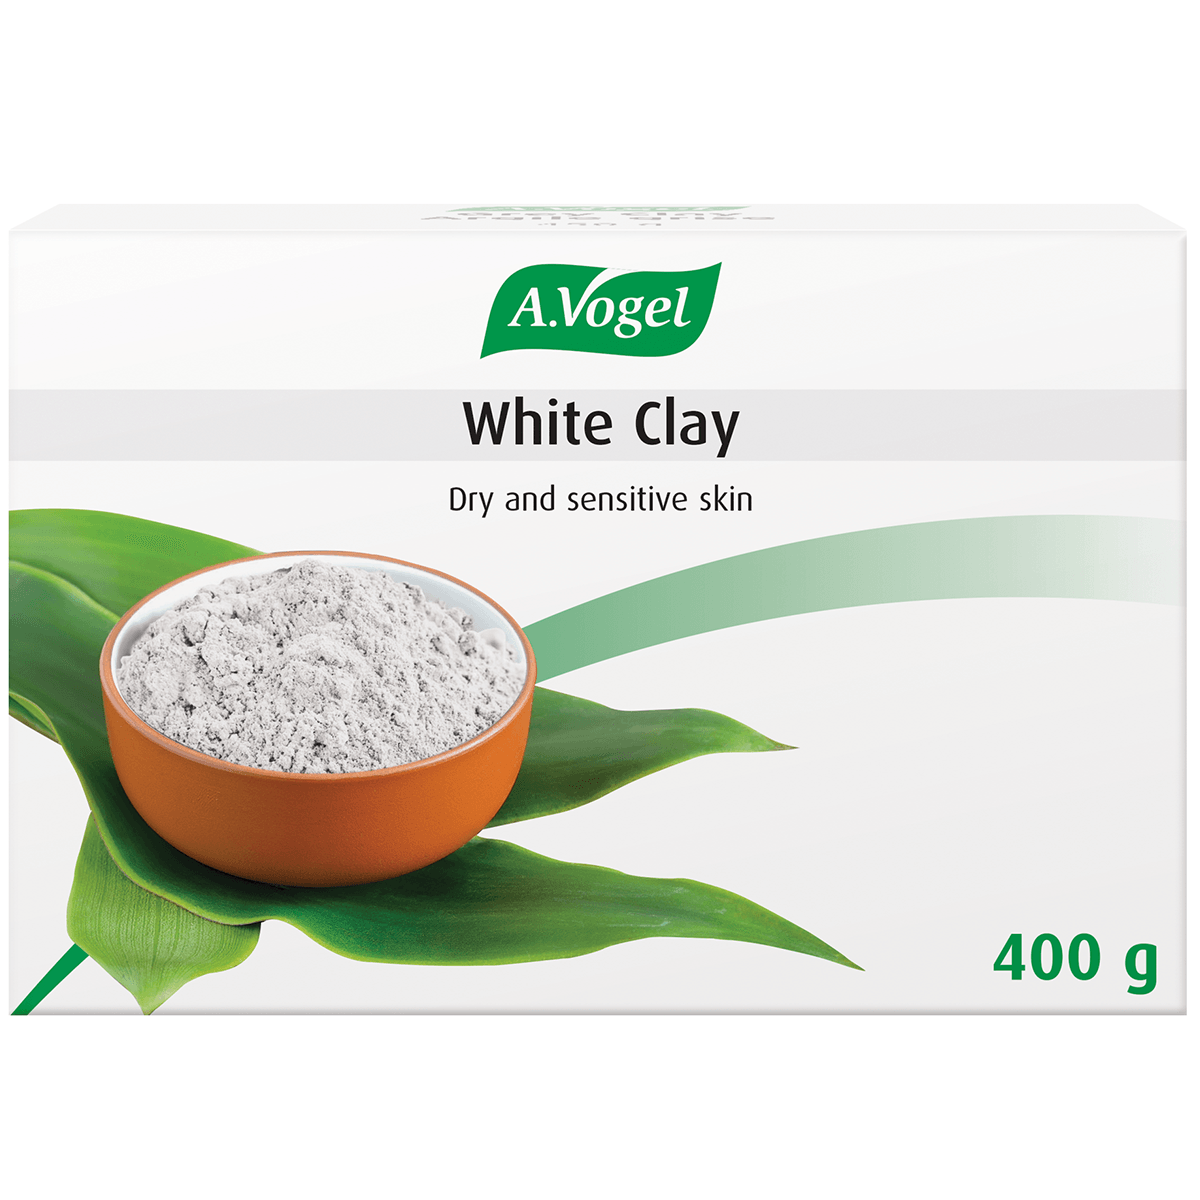 A. Vogel White Clay 400g Face Mask at Village Vitamin Store